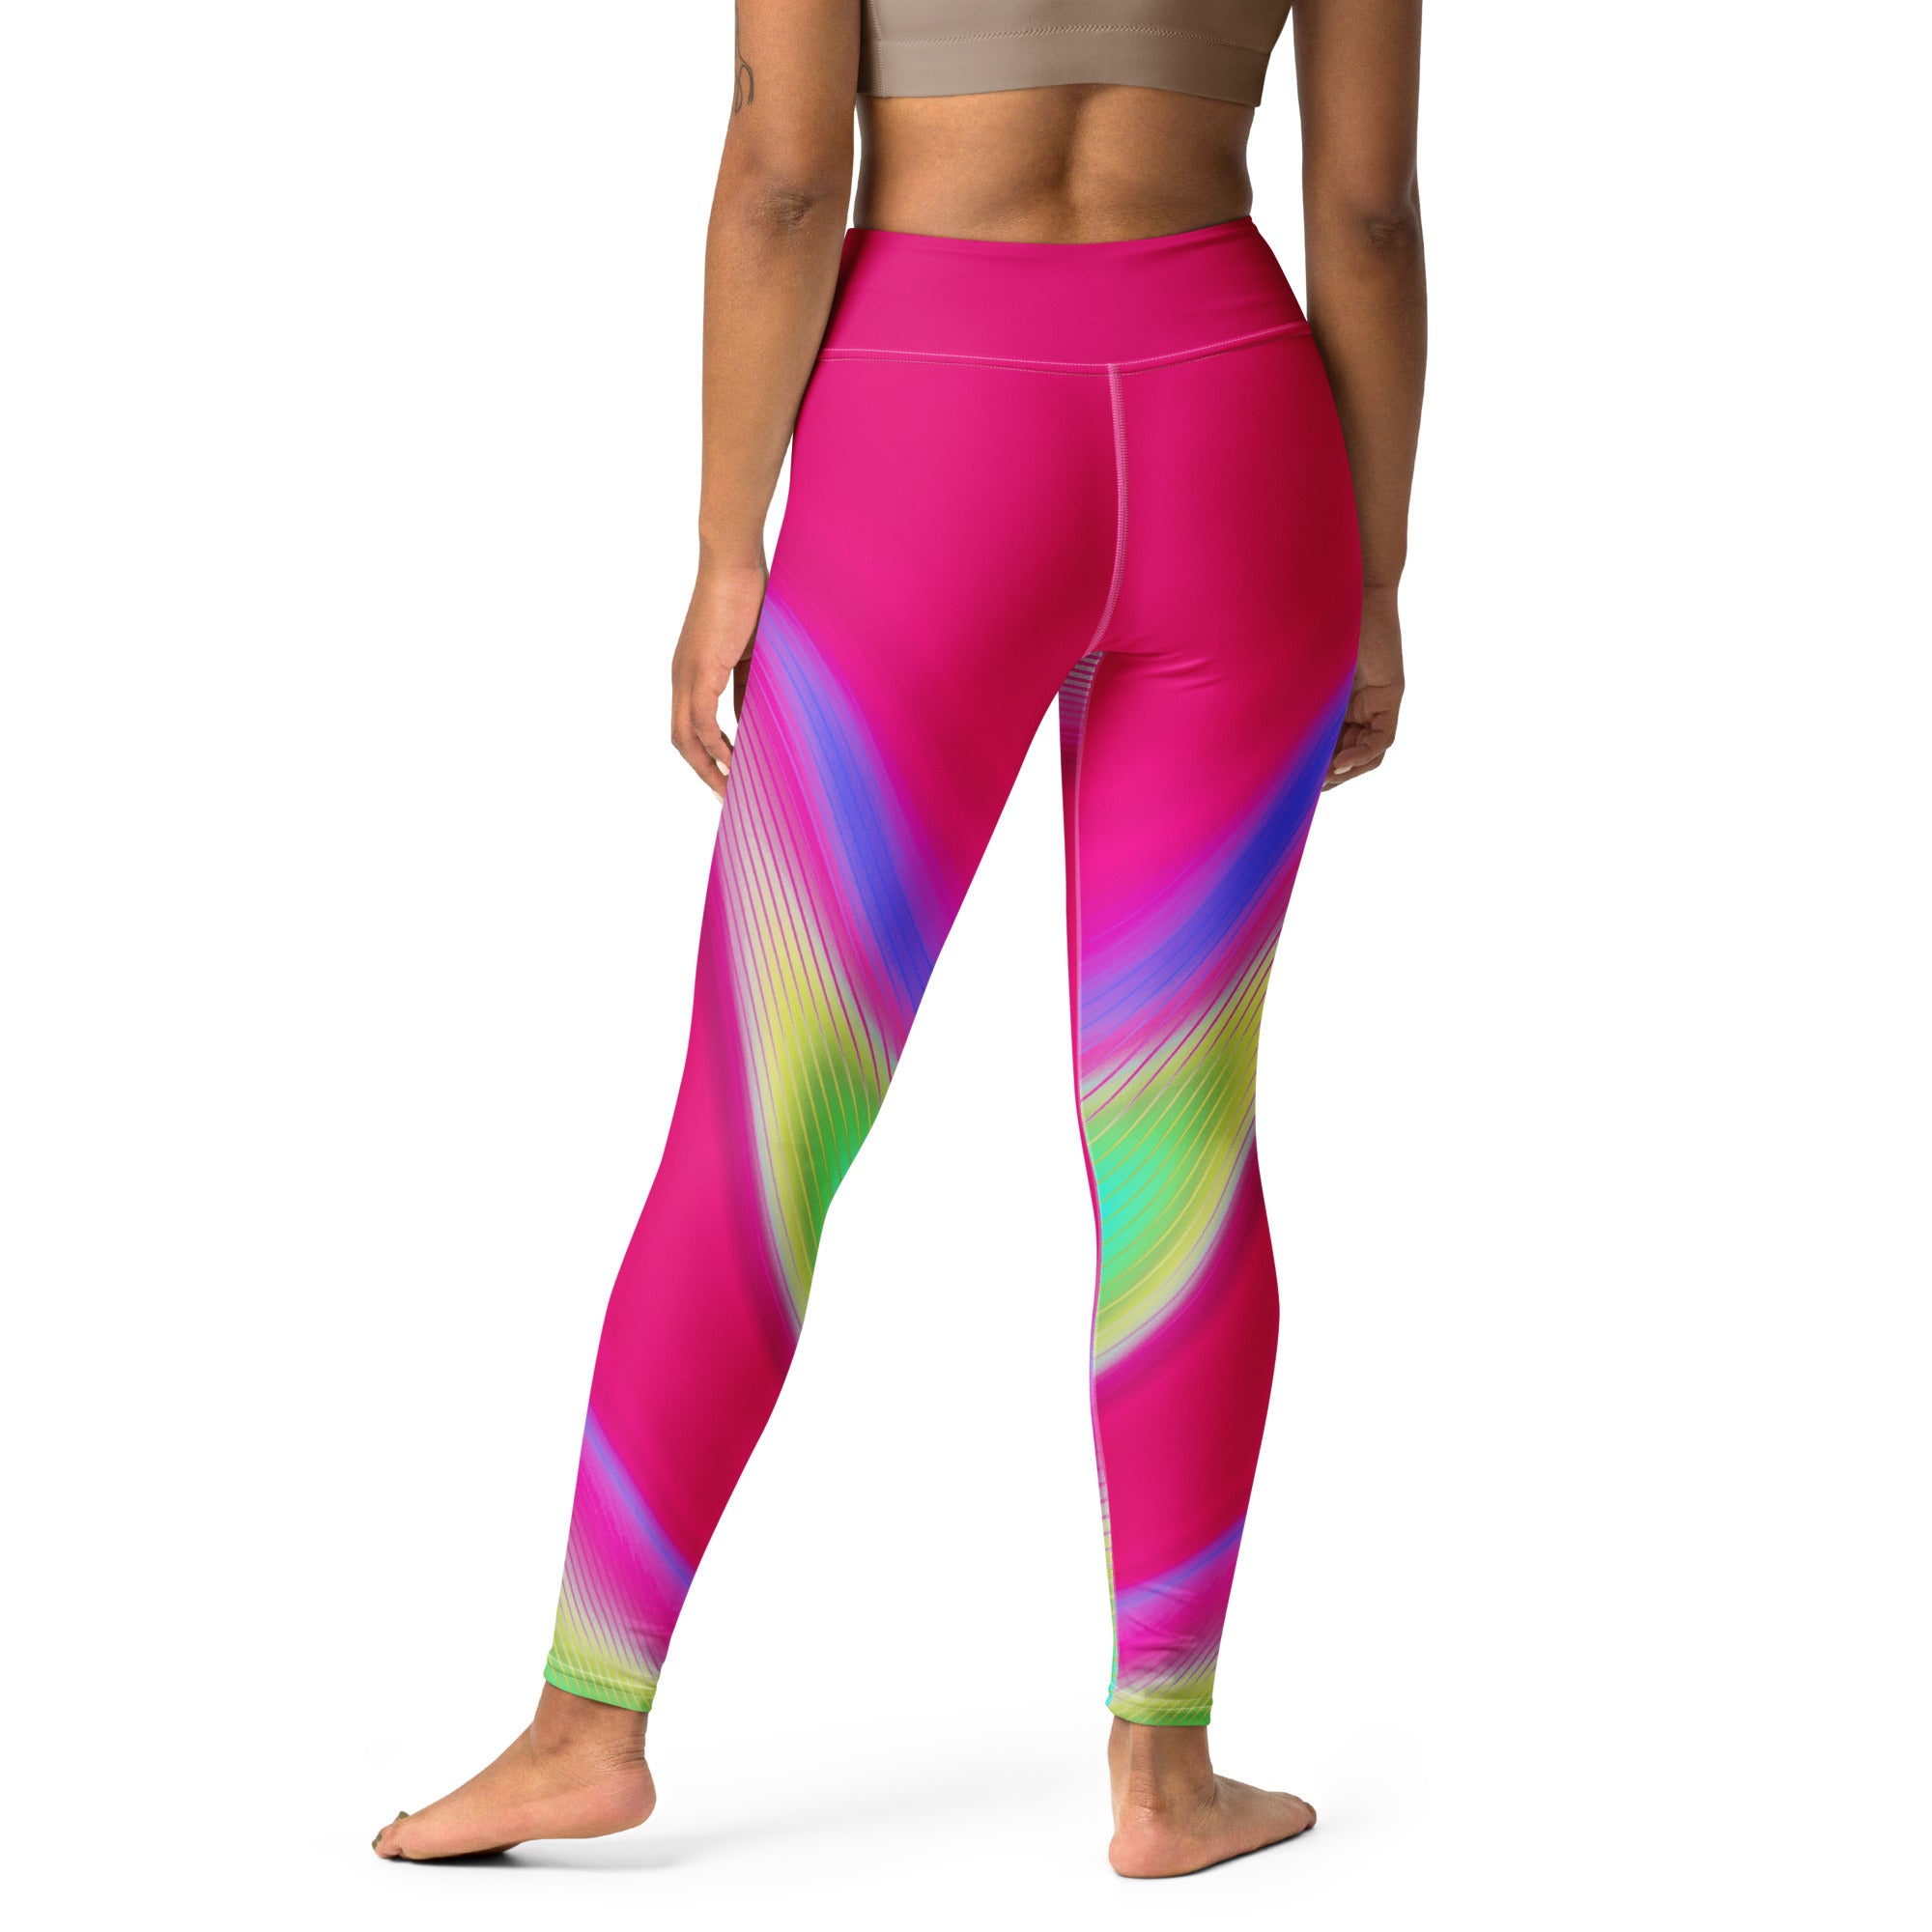 Cosmic Flow Yoga Leggings, the ideal companion for a peaceful outdoor meditation.